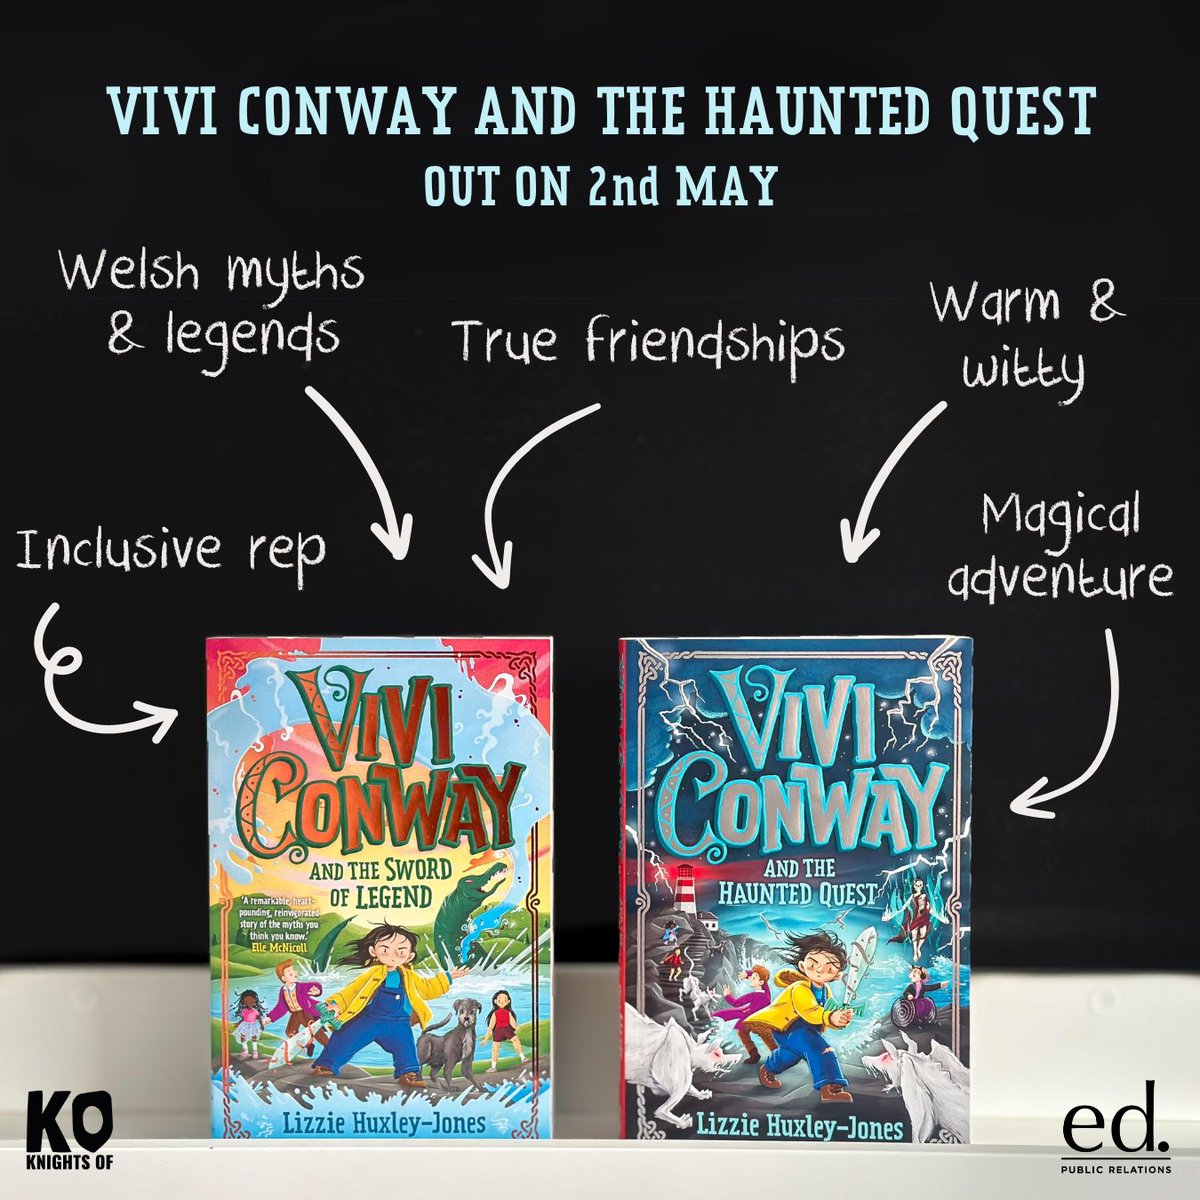 We’re packing our bags and going back to Wales! One more sleep until #ViviConway and the Haunted Quest by @littlehux is out in the world👏   Join Vivi and friends on another thrilling journey where the fate of the world is resting on the gang’s shoulders (again)…